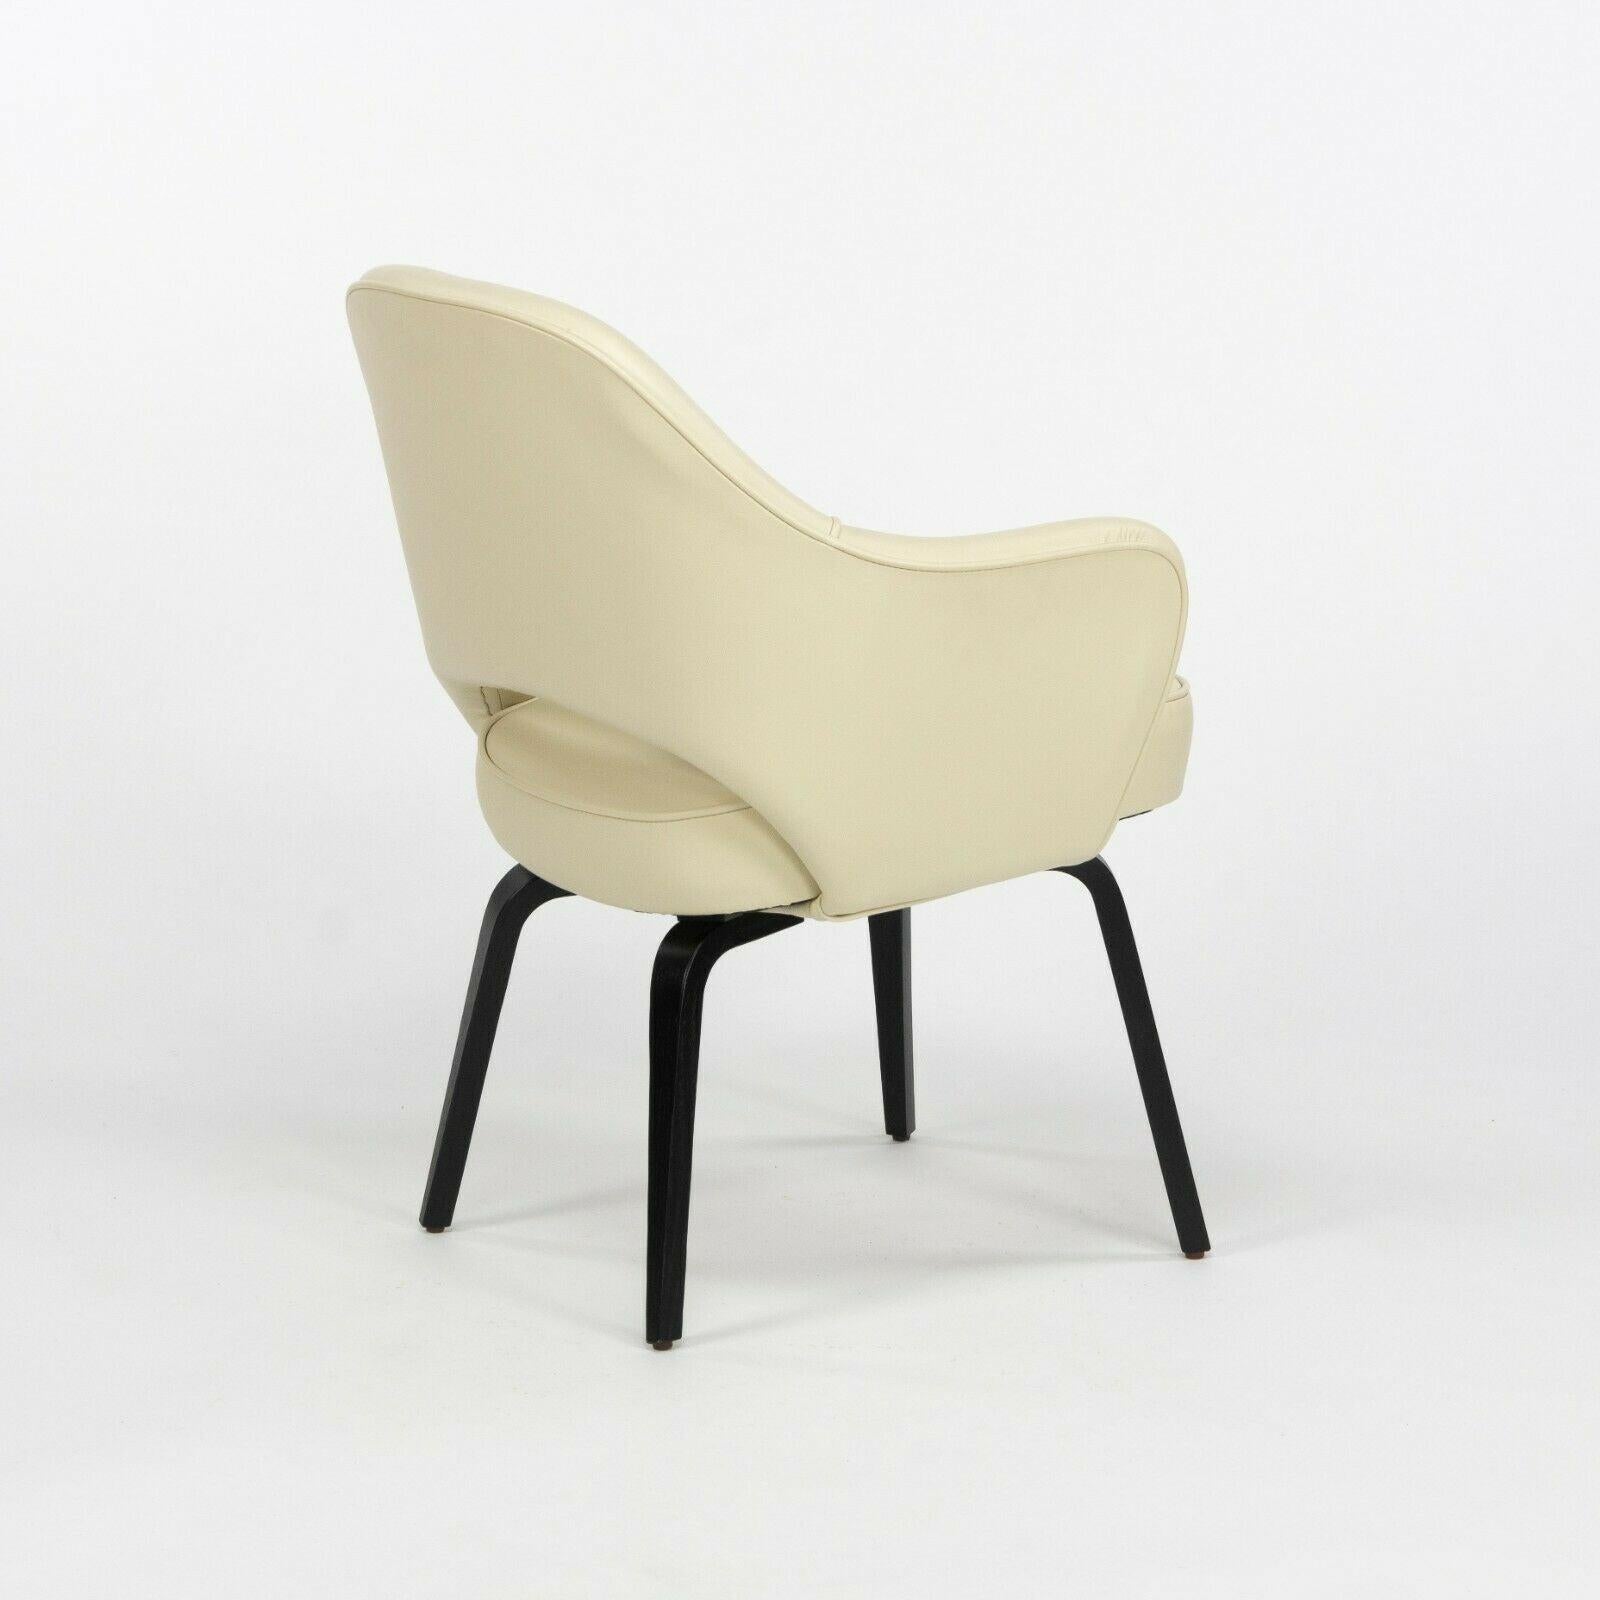 Eero Saarinen for Knoll 2020 Executive Armchair with Ivory Leather & Wood Legs In Good Condition For Sale In Philadelphia, PA